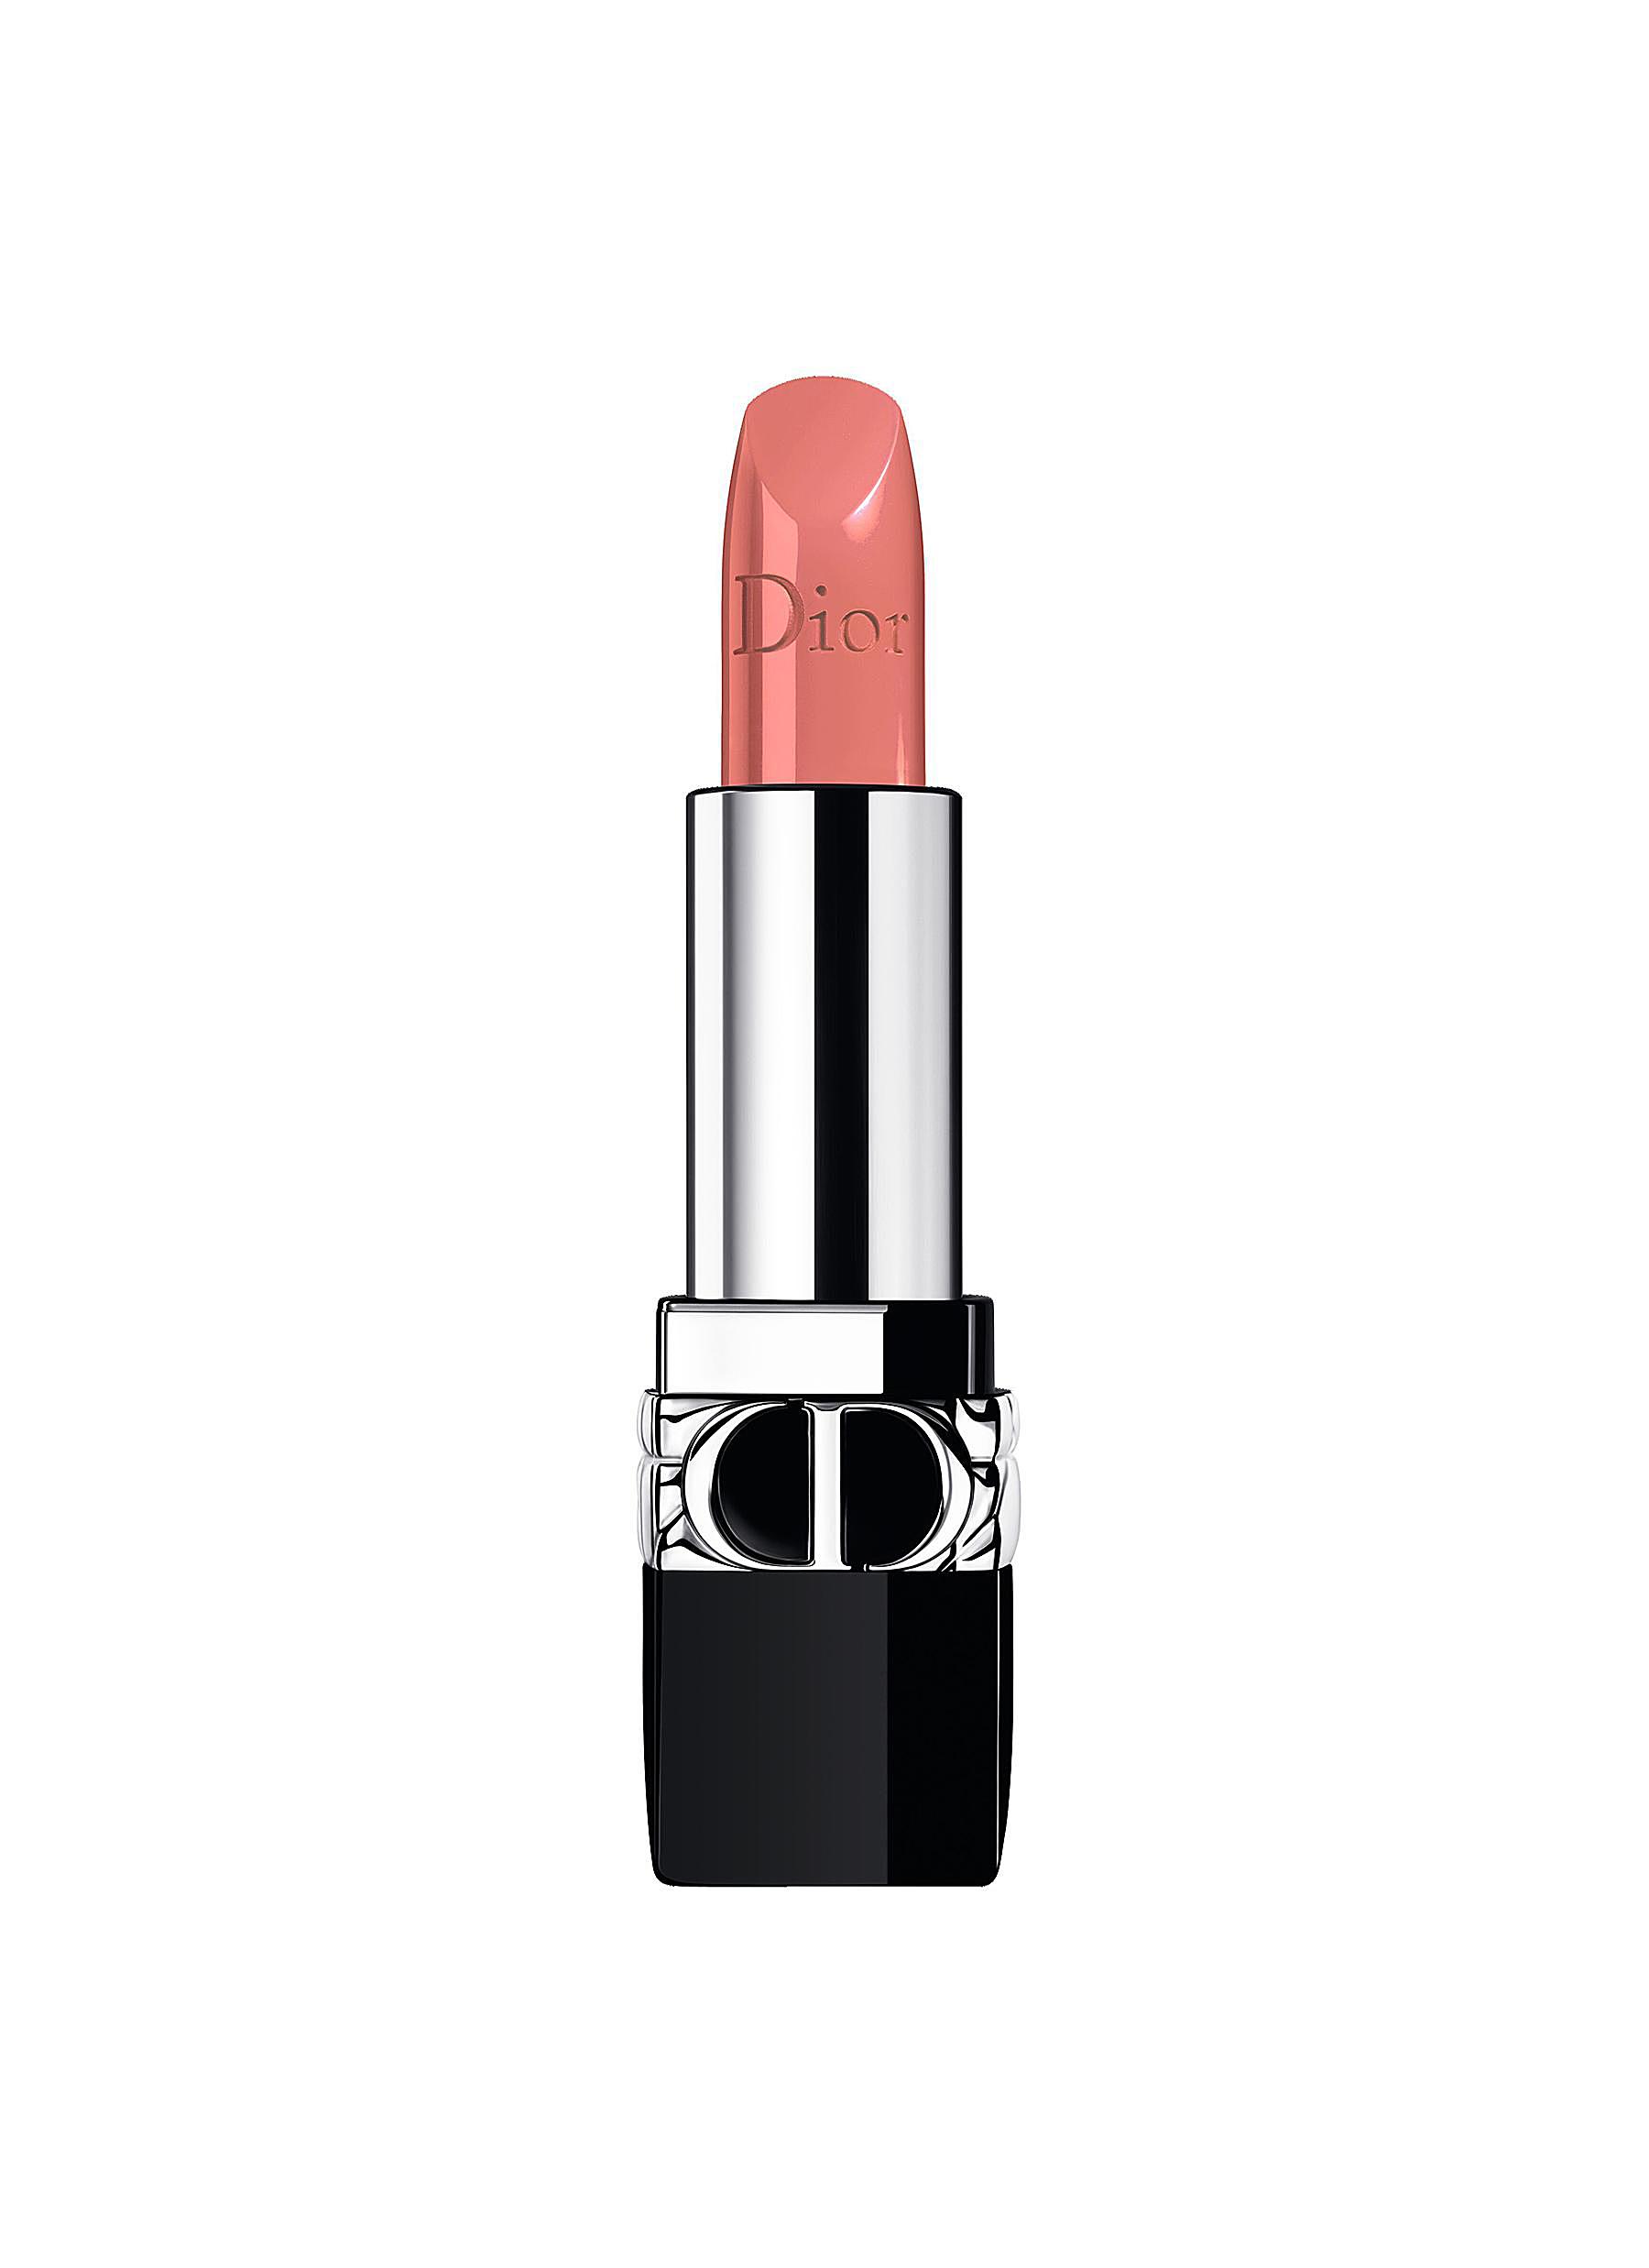 DIOR BEAUTY  Rouge Dior Colored Lip Balm  772 Classic  Beauty  Lane  Crawford